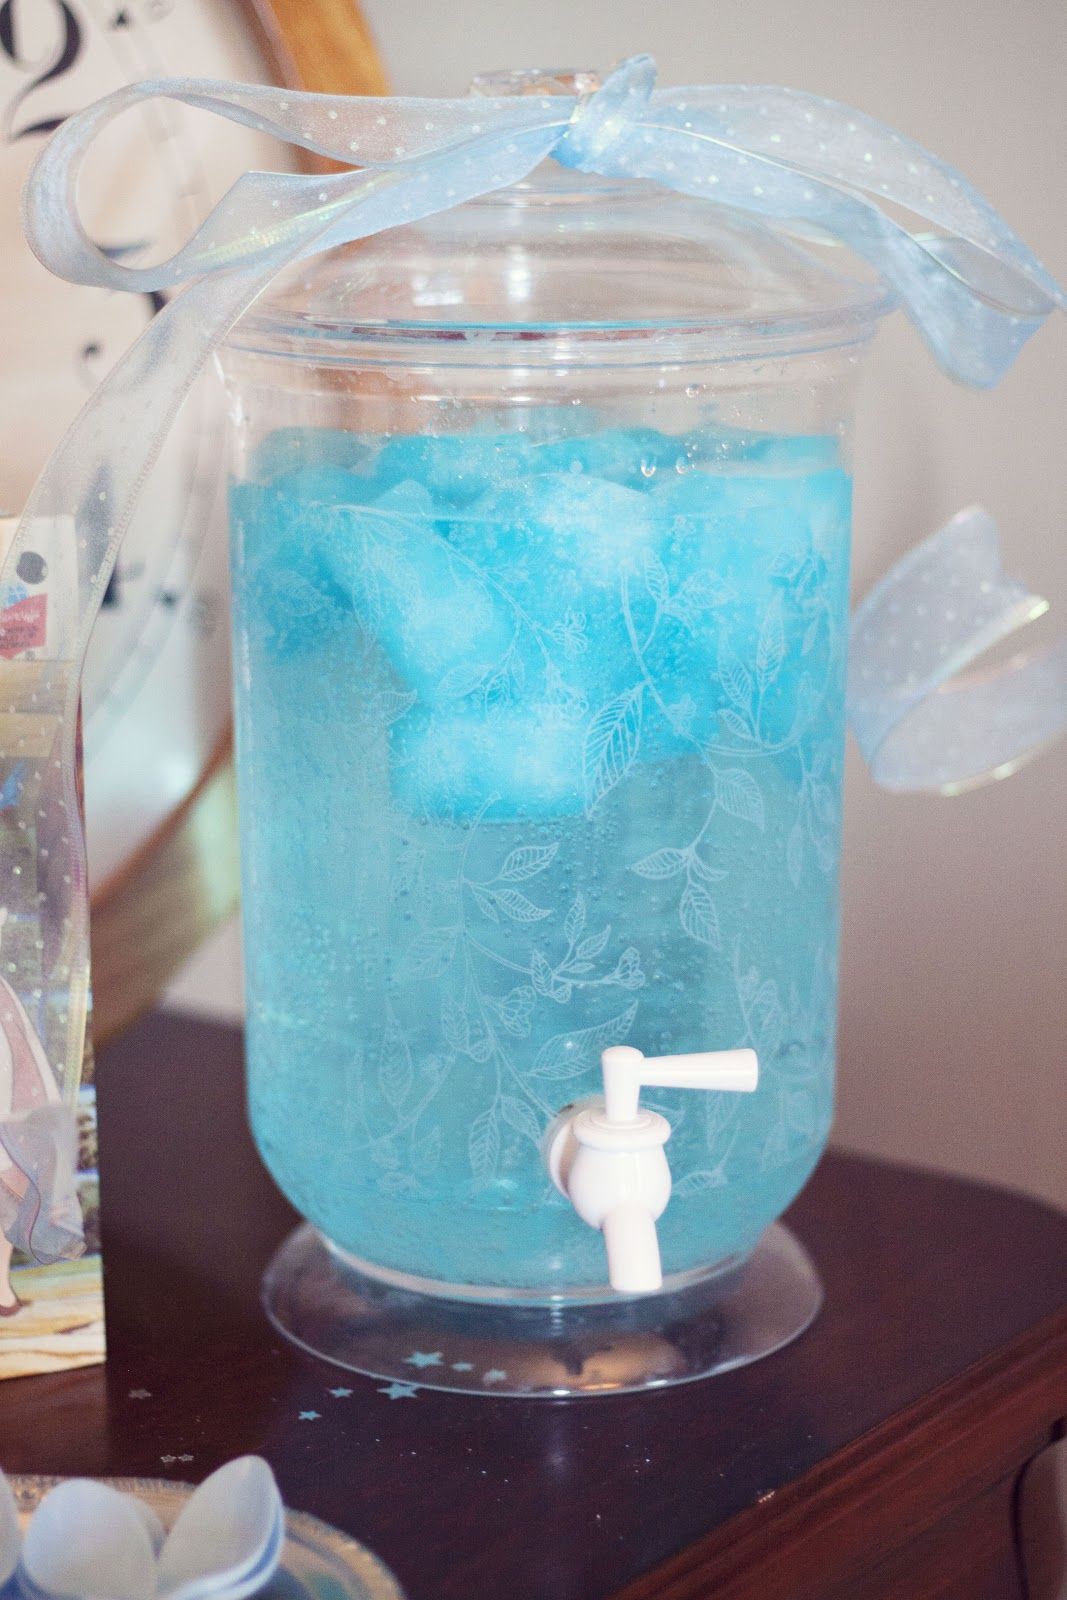 Sprite with frozen blue Hawaiian punch – this just sounds sooo yummy right now!